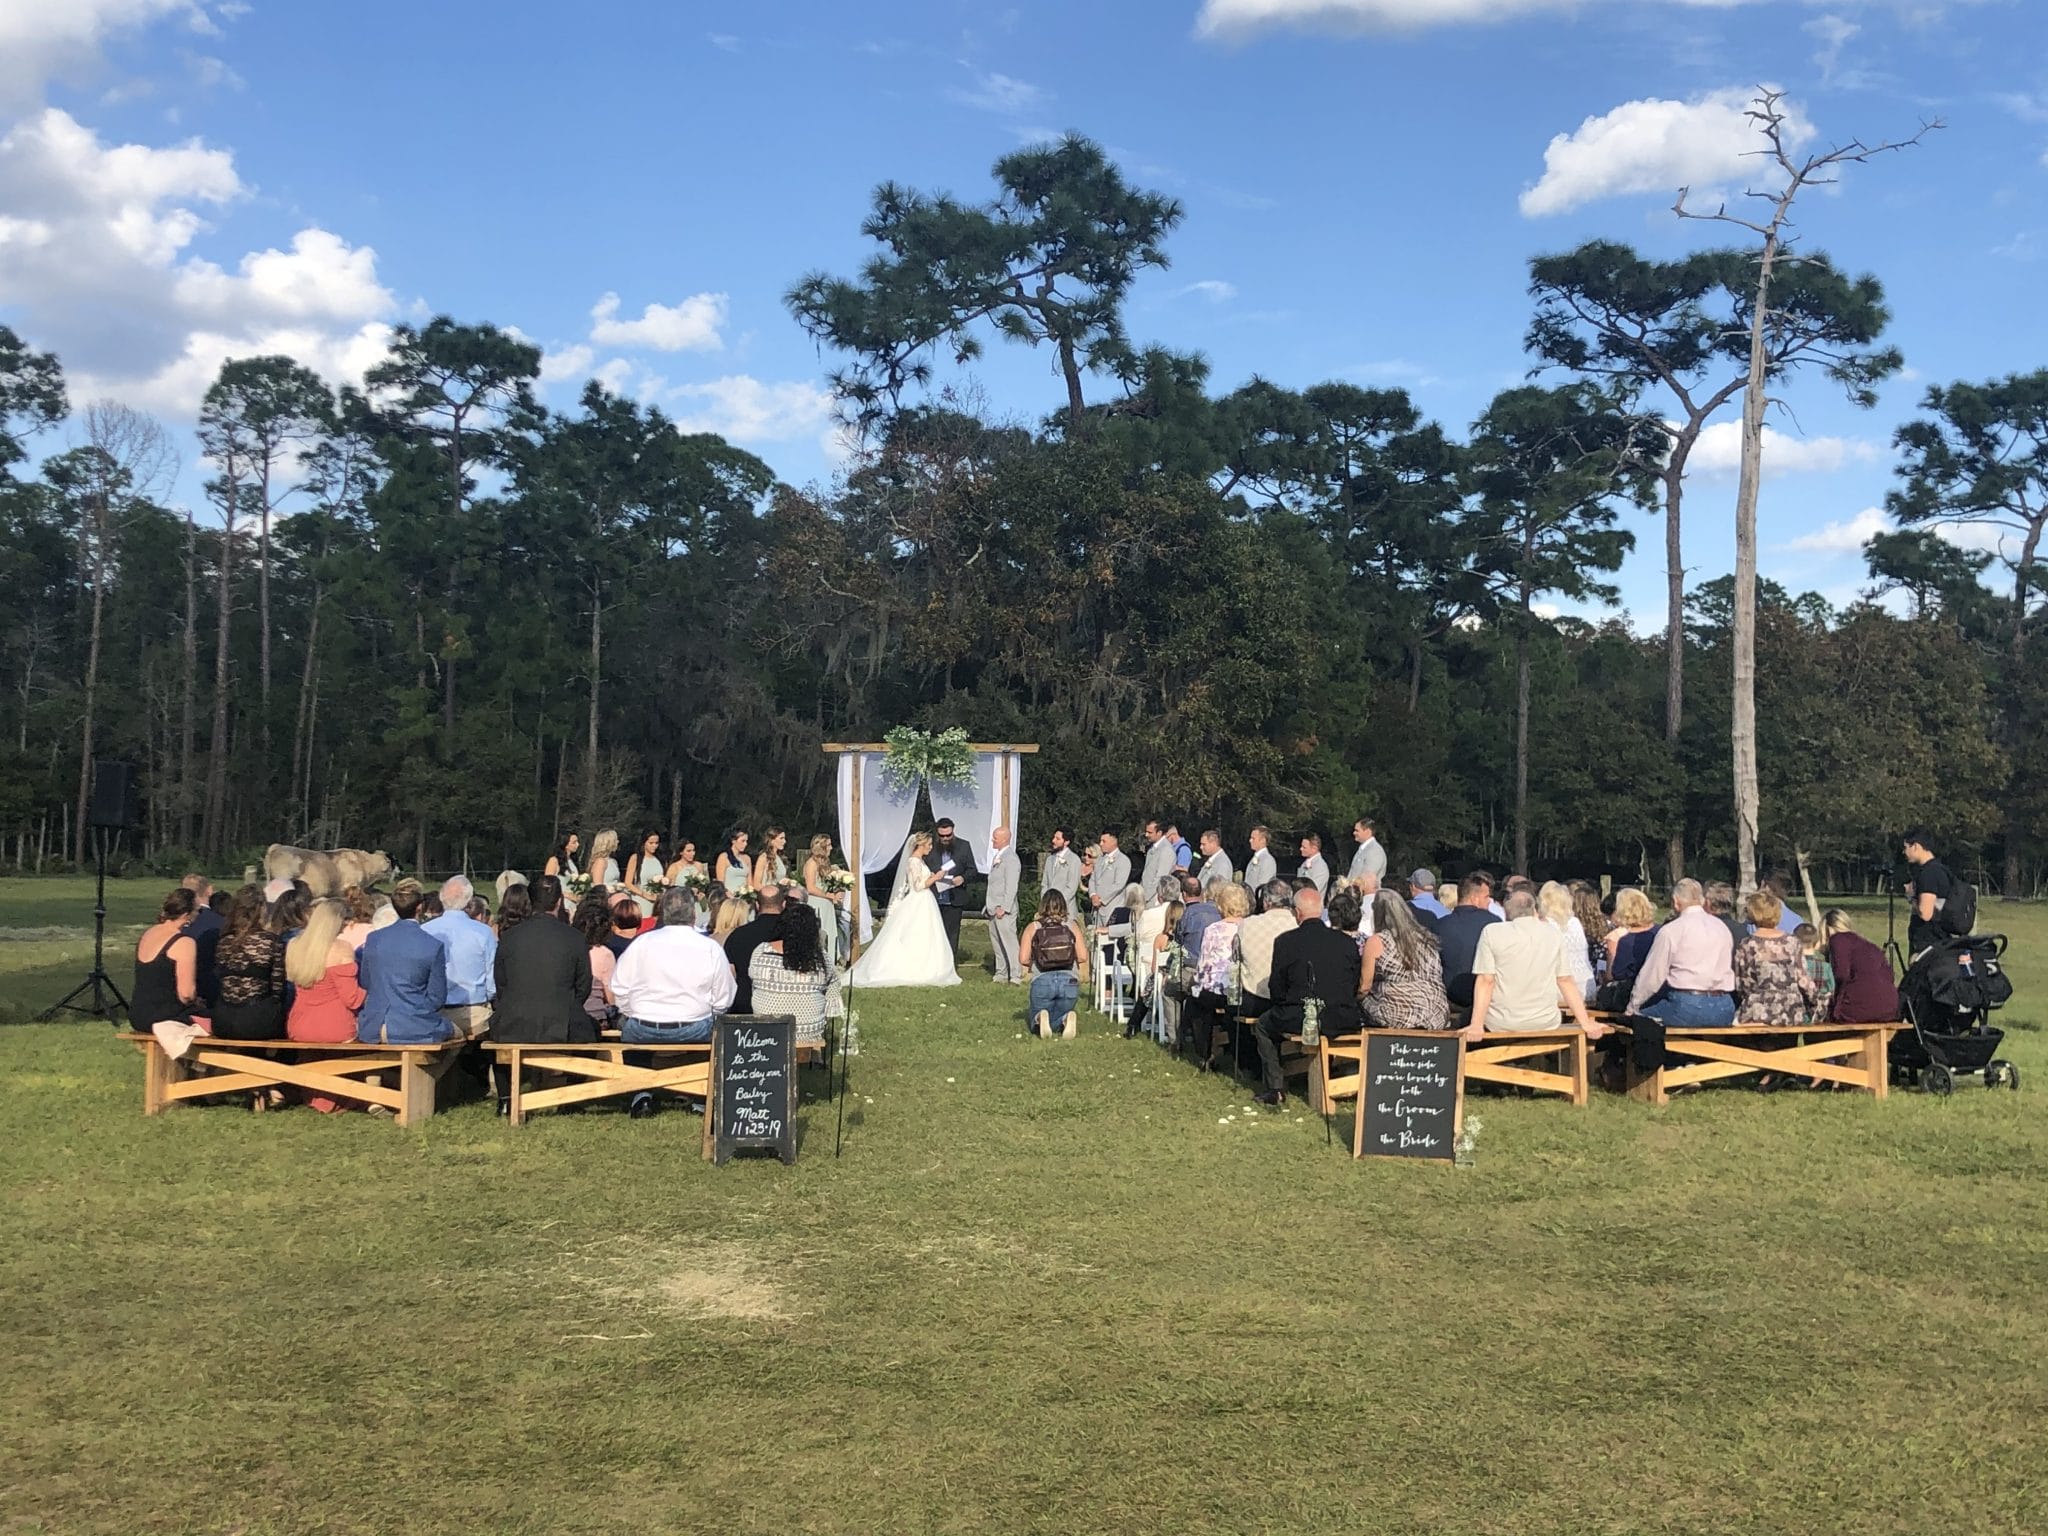 Diamond L Venue - wedding ceremony with guest on benches outside